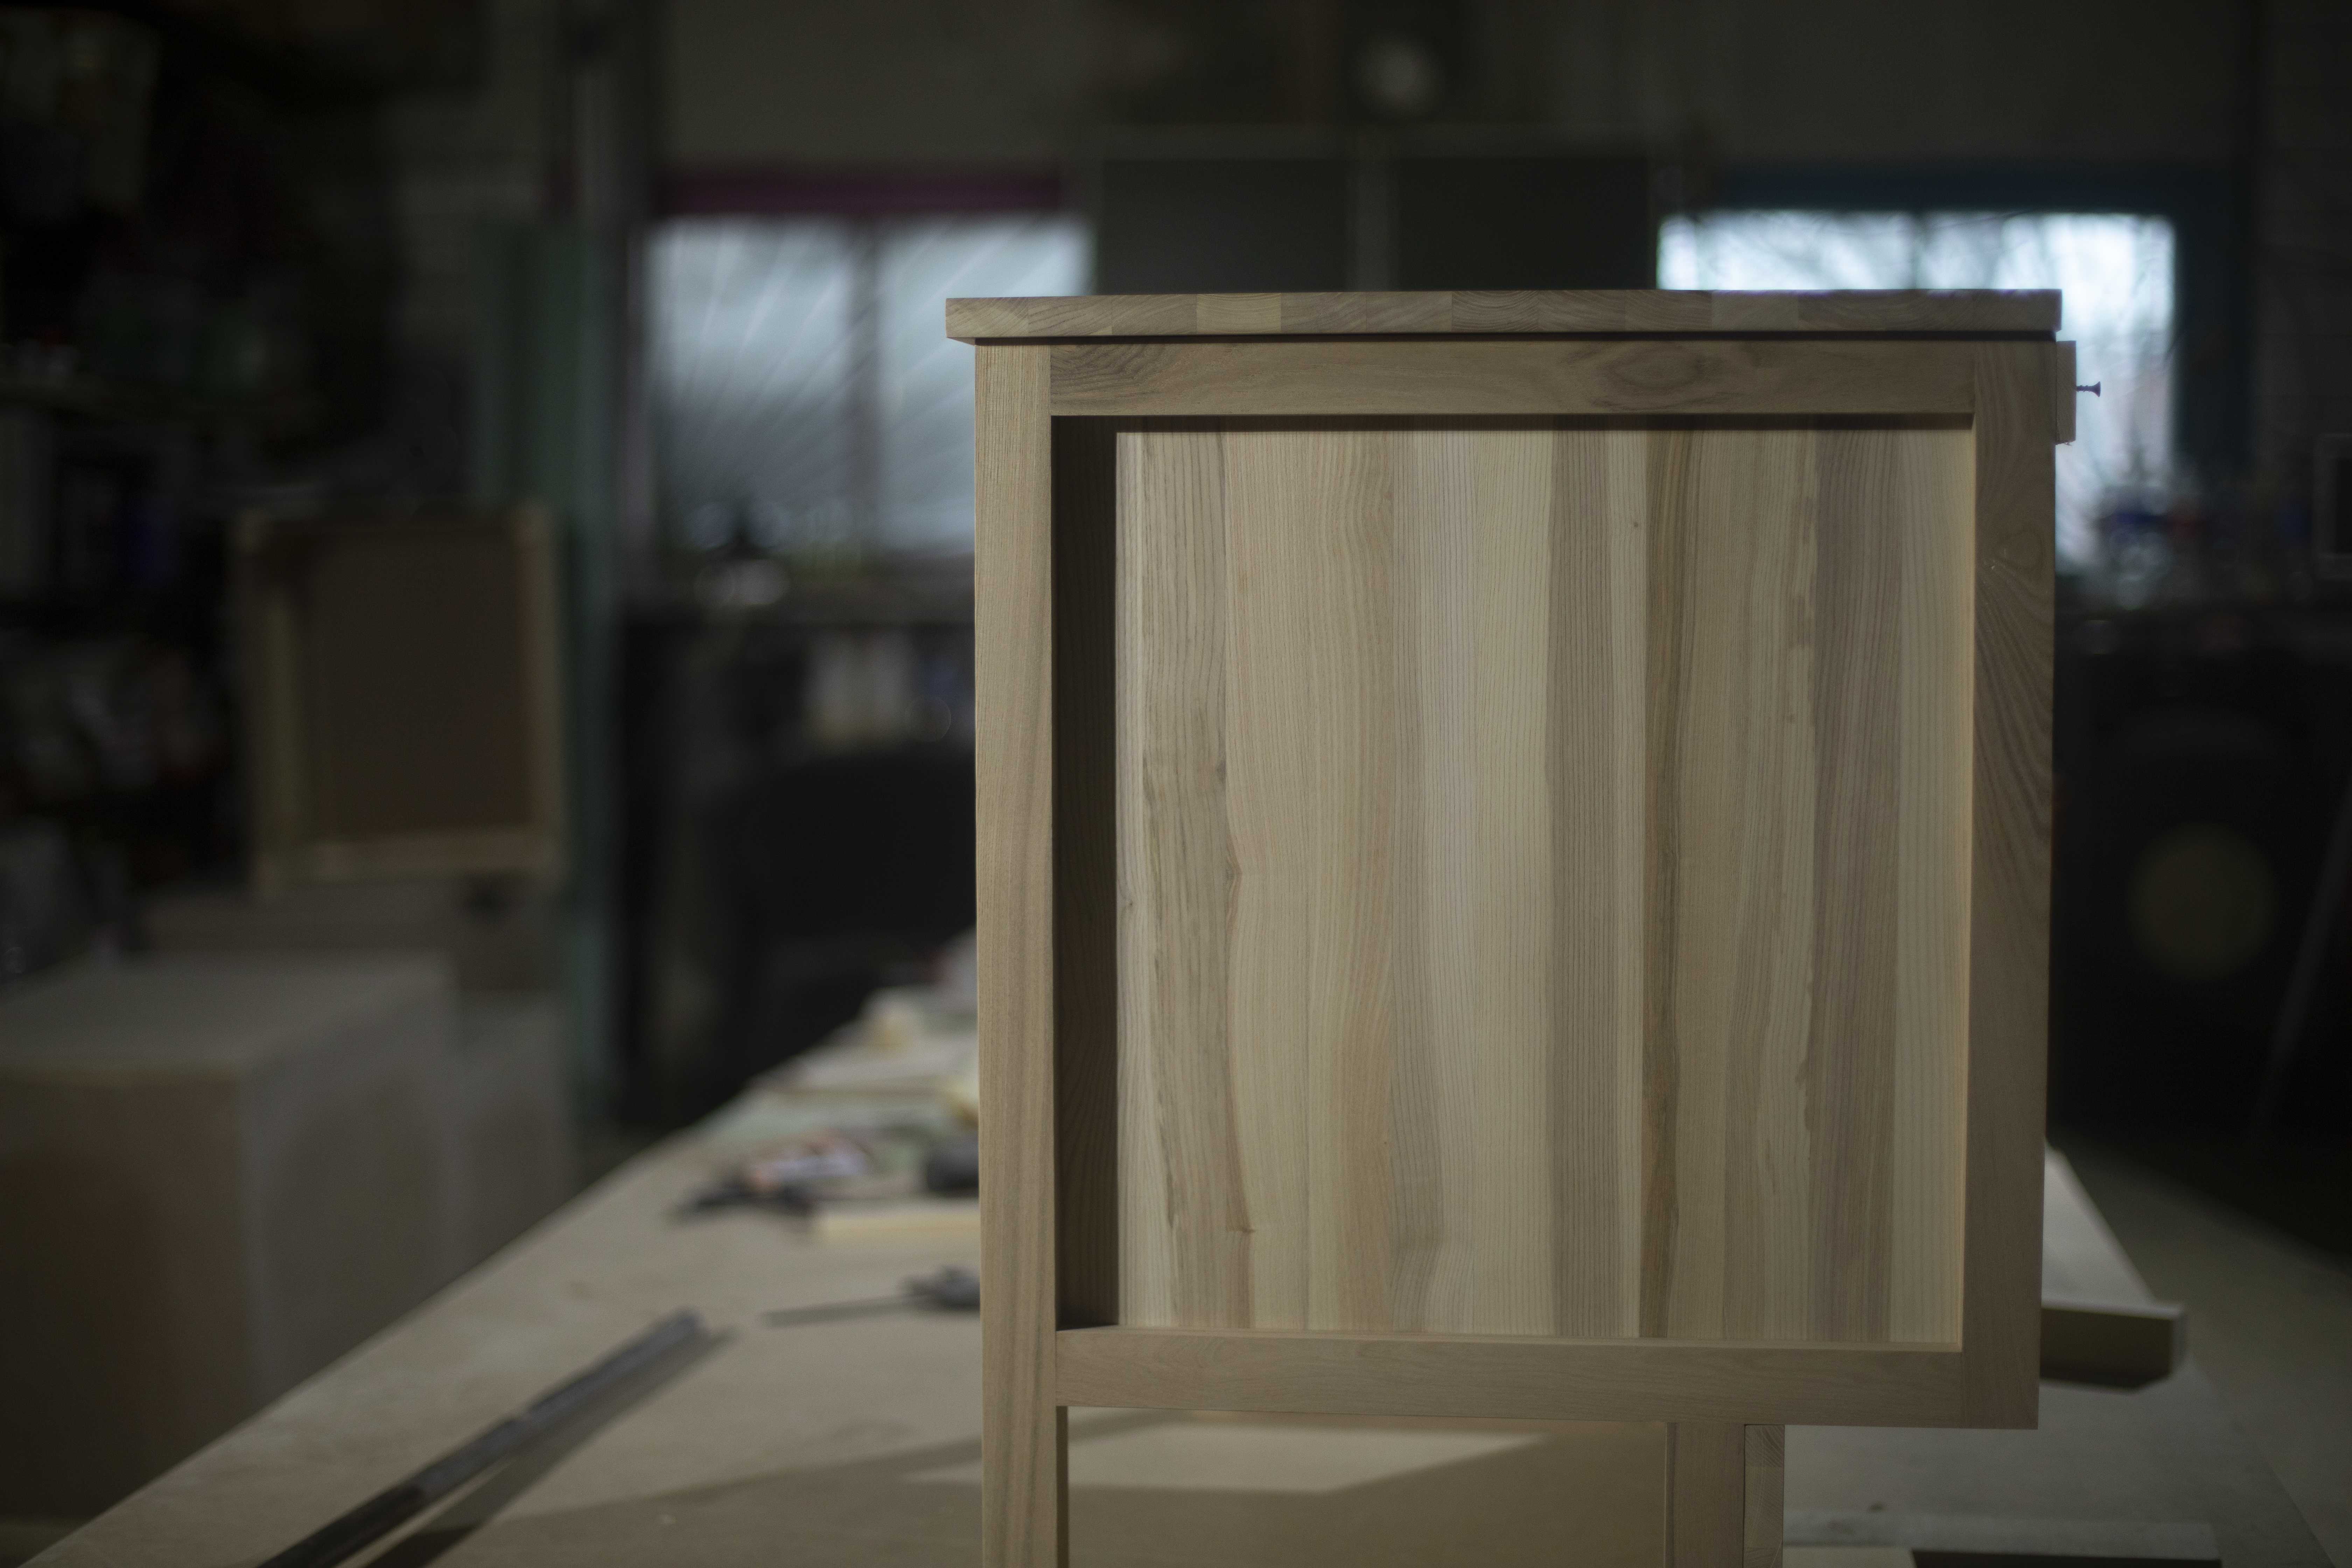 Furniture made of wood in carpentry workshop Table of boards Production details